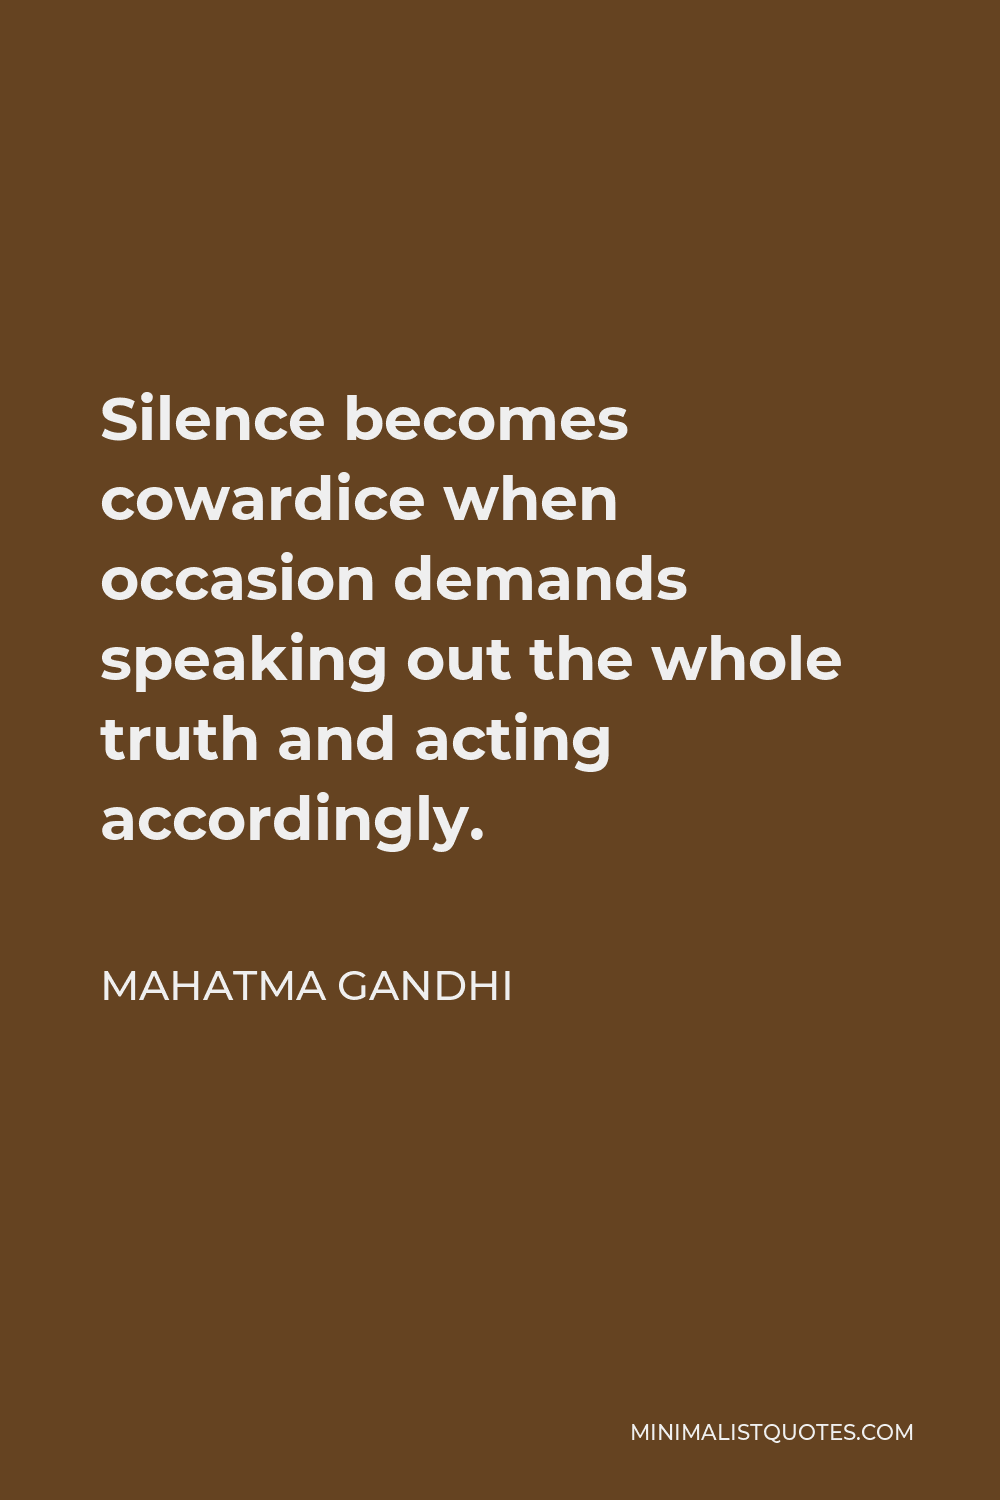 Mahatma Gandhi Quote - Silence becomes cowardice when occasion demands speaking out the whole truth and acting accordingly.